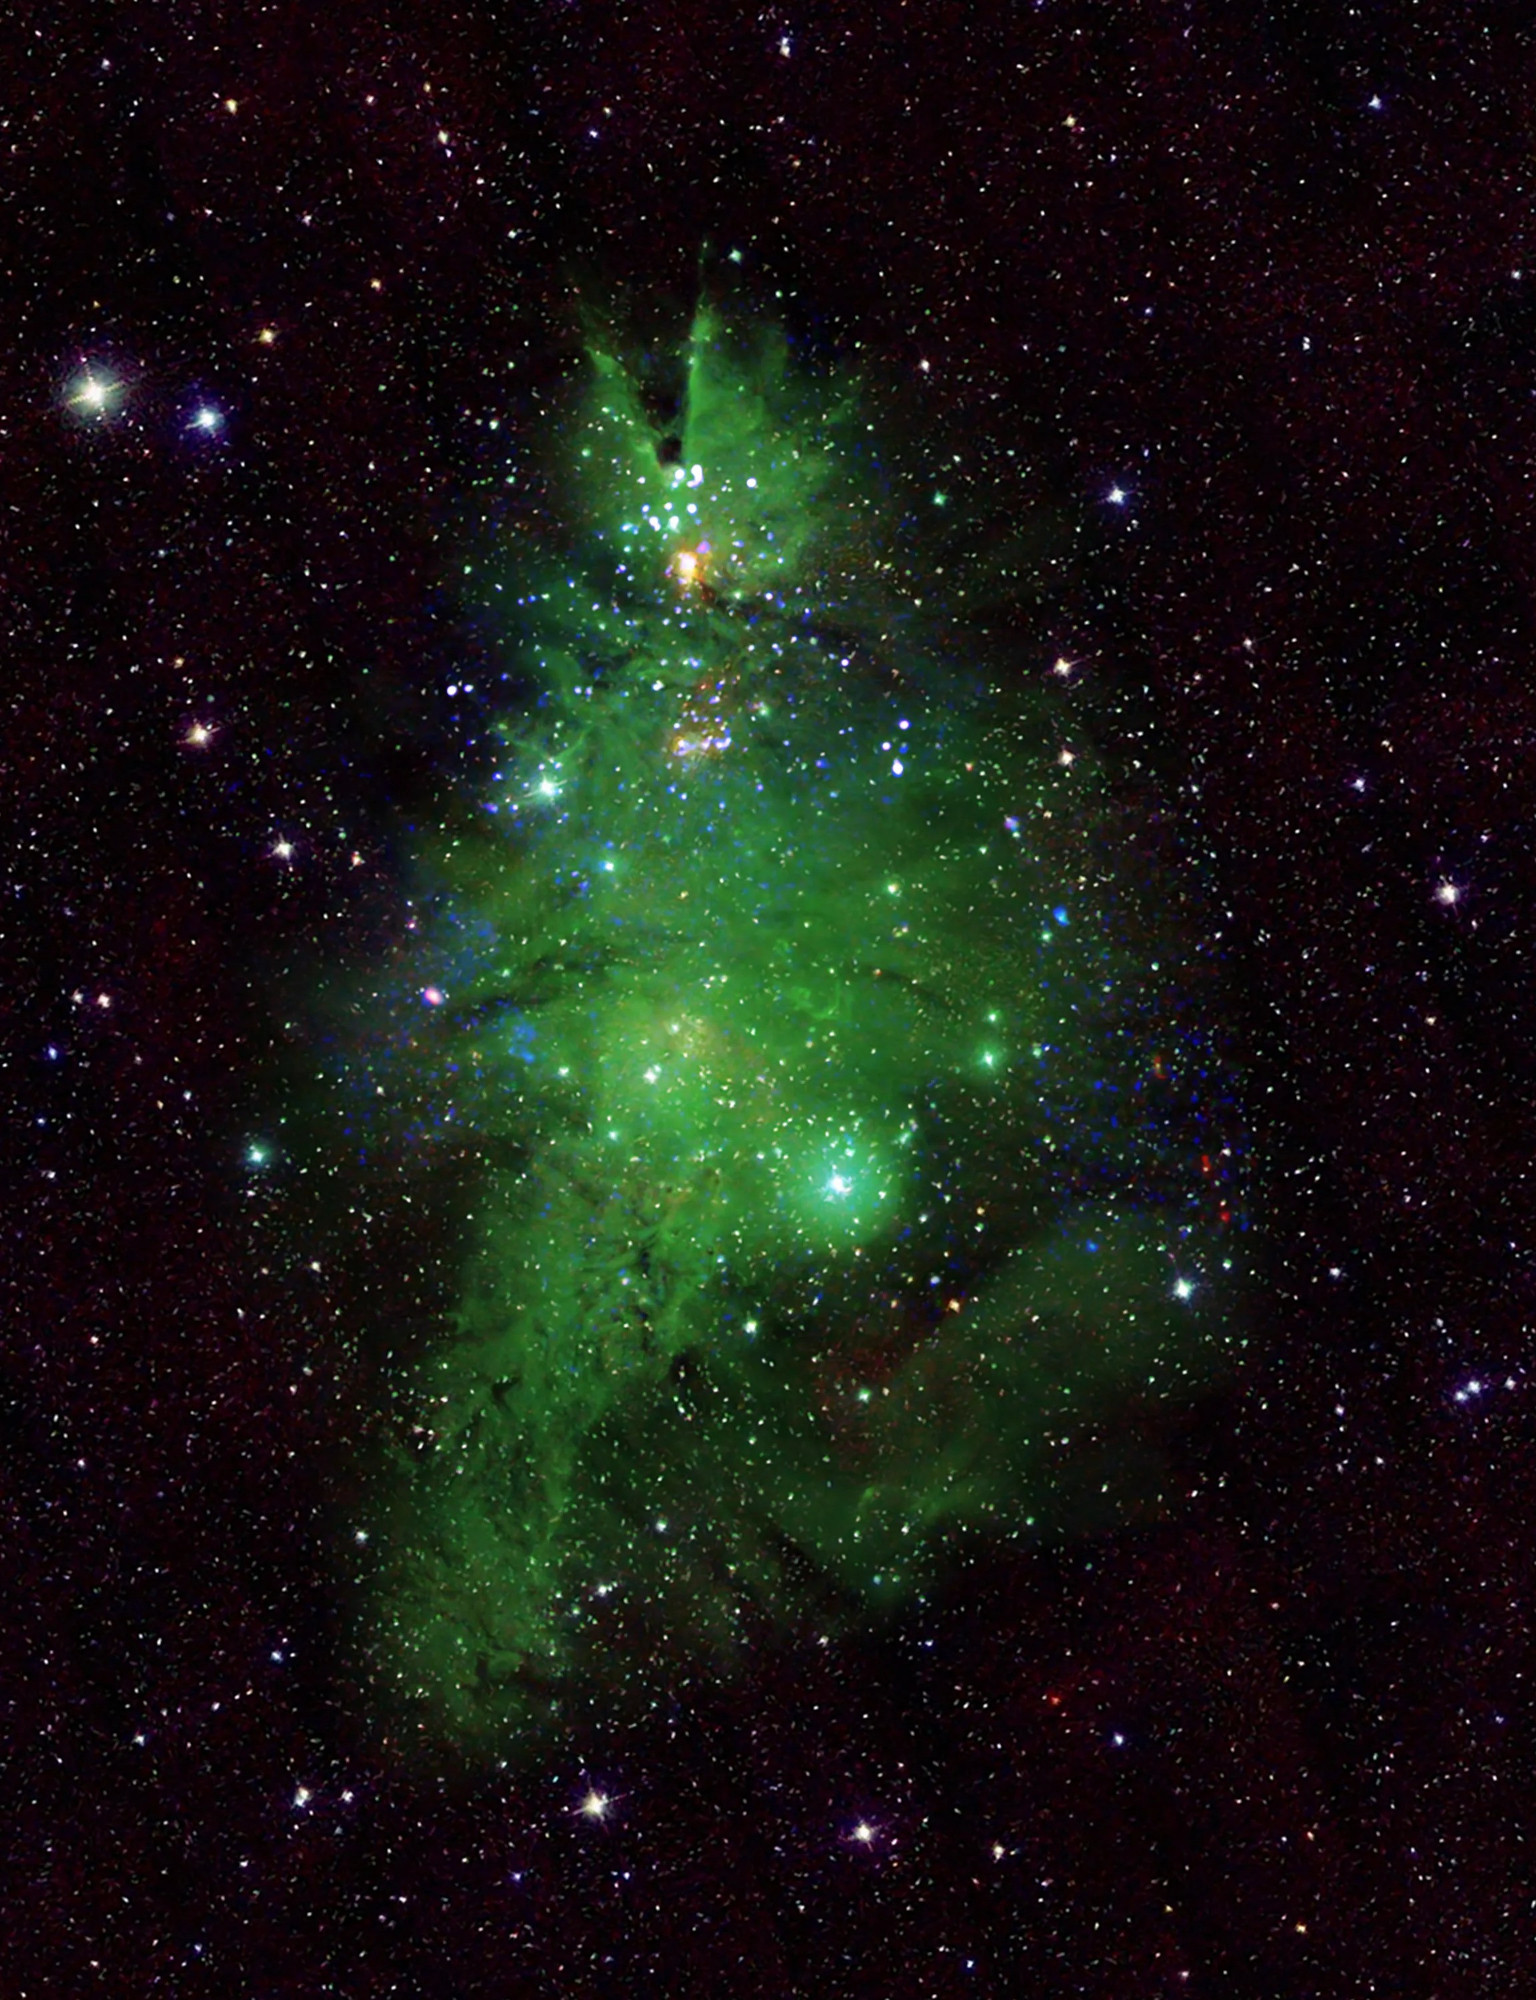 This new composite image enhances the resemblance to a Christmas tree through choices of color and rotation. The blue and white lights (which blink in the animated version of this image) are young stars that give off X-rays detected by NASA’s Chandra X-ray Observatory. Optical data from the National Science Foundation’s WIYN 0.9-meter telescope on Kitt Peak shows gas in the nebula in green, corresponding to the “pine needles” of the tree, and infrared data from the Two Micron All Sky Survey shows foreground and background stars in white. This image has been rotated clockwise by about 160 degrees from the astronomer’s standard of North pointing upward, so that it appears like the top of the tree is toward the top of the image.